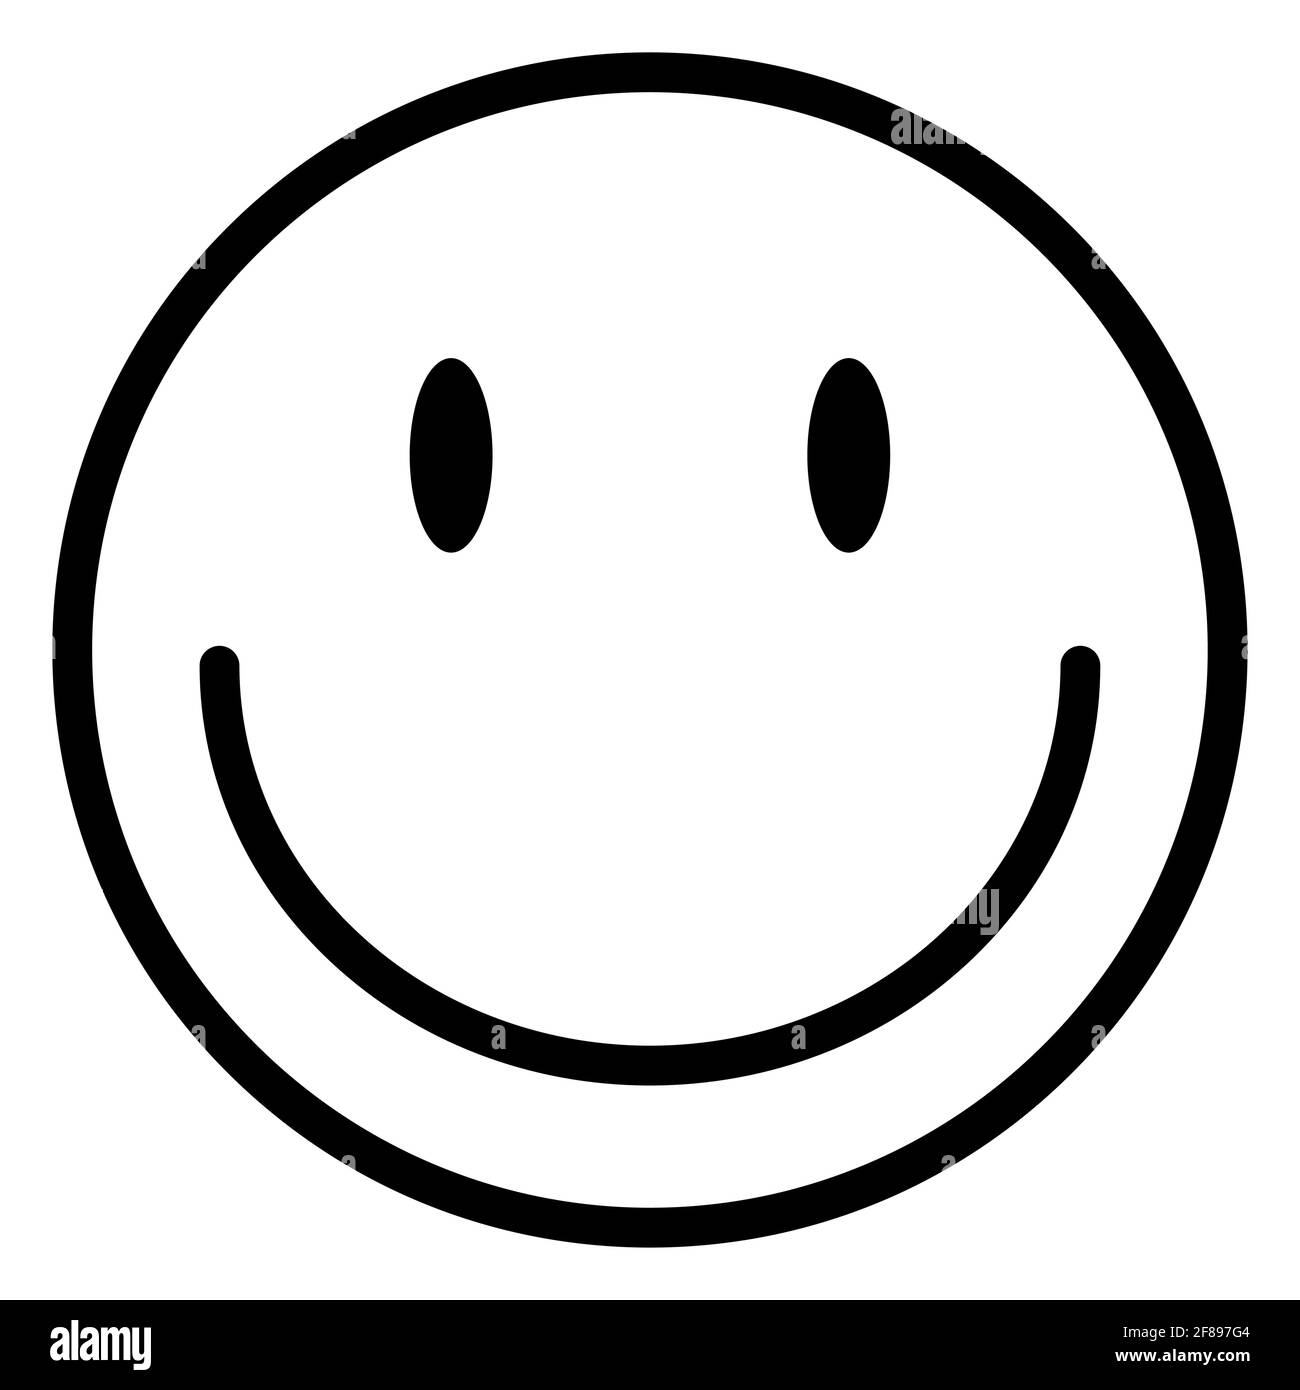 Smiley face icon Black and White Stock Photos & Images - Alamy